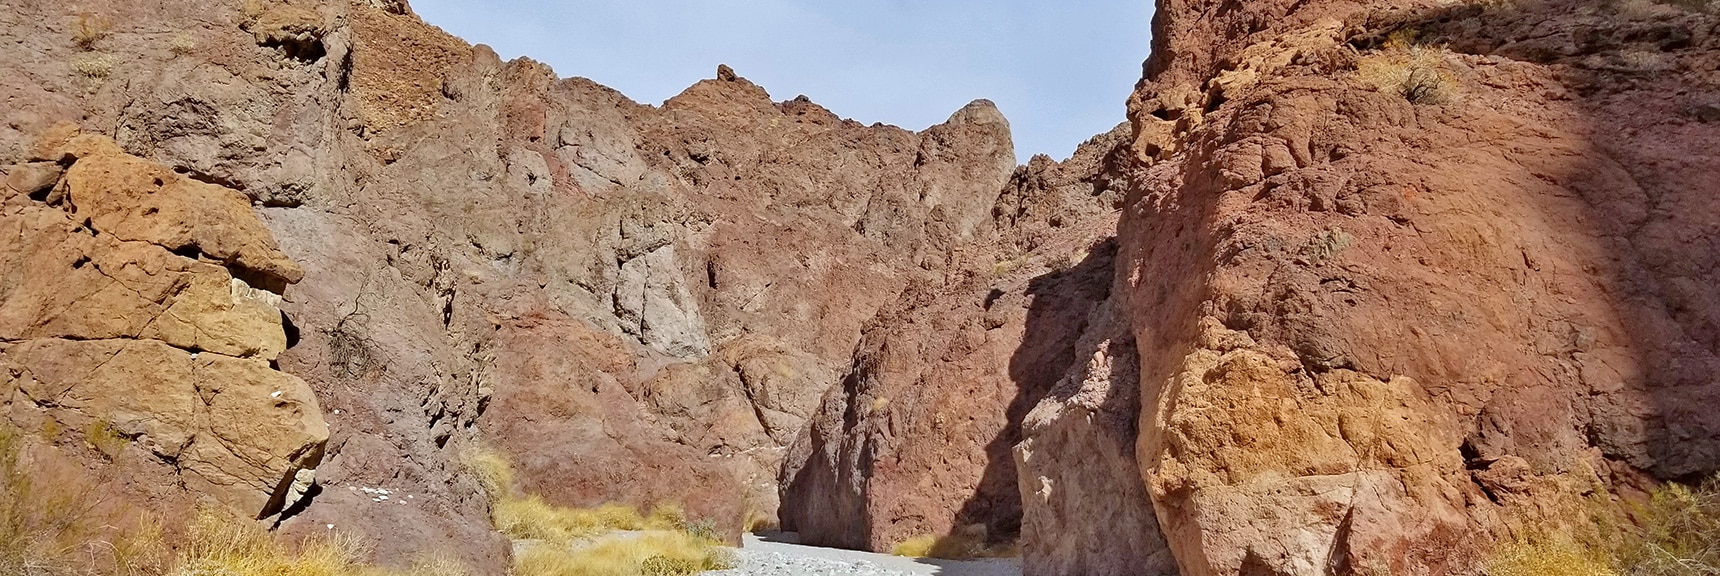 Continuing to Wind Down White Rock Canyon. Fine Deep Gravel Surface. | Arizona Hot Spring | Liberty Bell Arch | Lake Mead National Recreation Area, Arizona